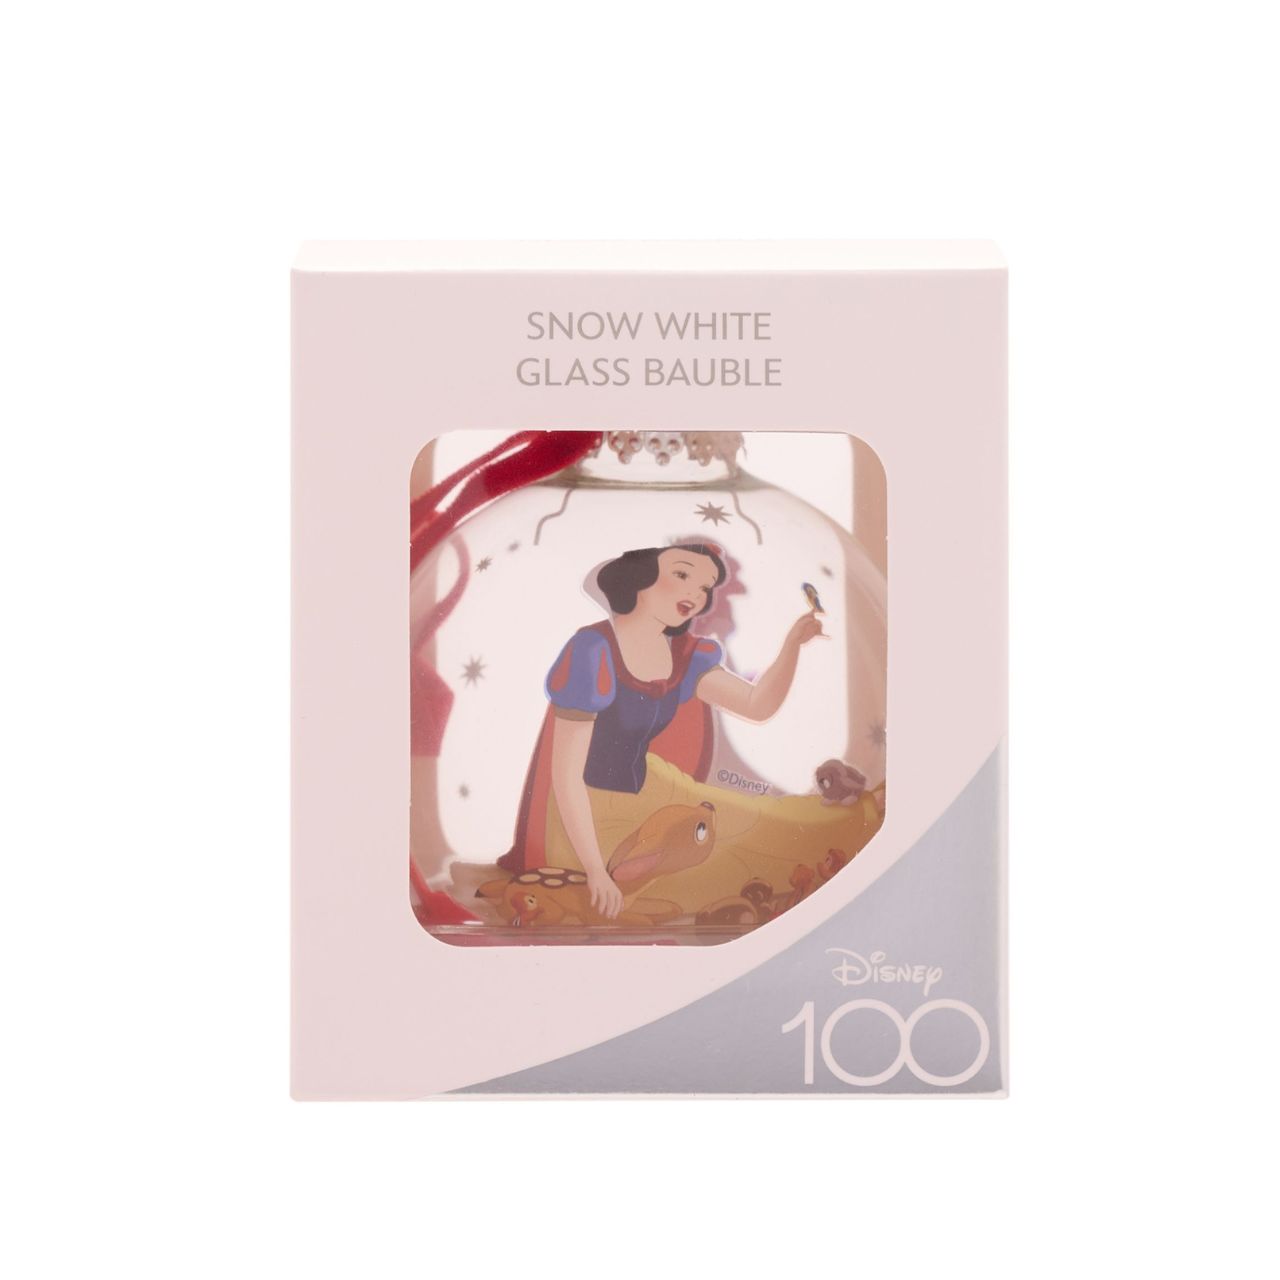 Disney 100th Anniversary Bauble - Snow White  A Snow White glass bauble from Disney 100 by DISNEY.  This limited edition tree decoration captures the true magic of Disney on its centenary and can be enjoyed by fans of all ages at Christmas.